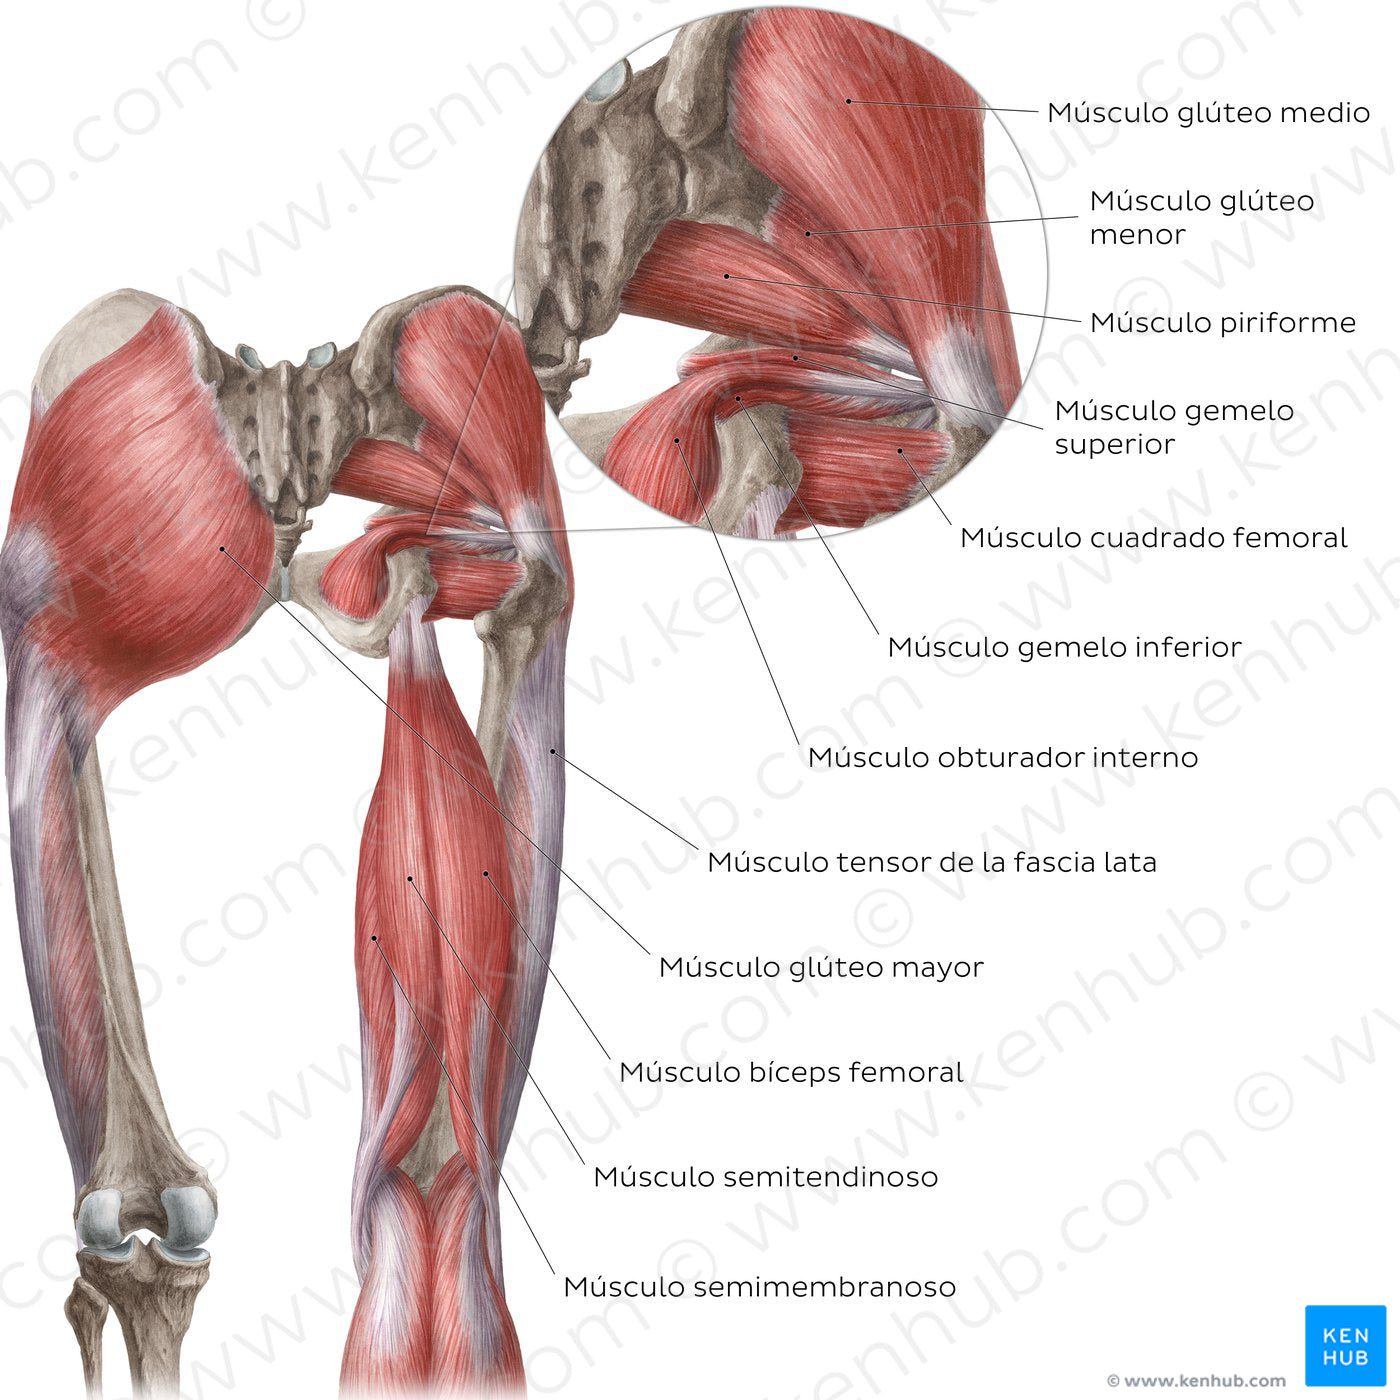 Muscles of the hip and thigh (Posterior view) (Spanish)